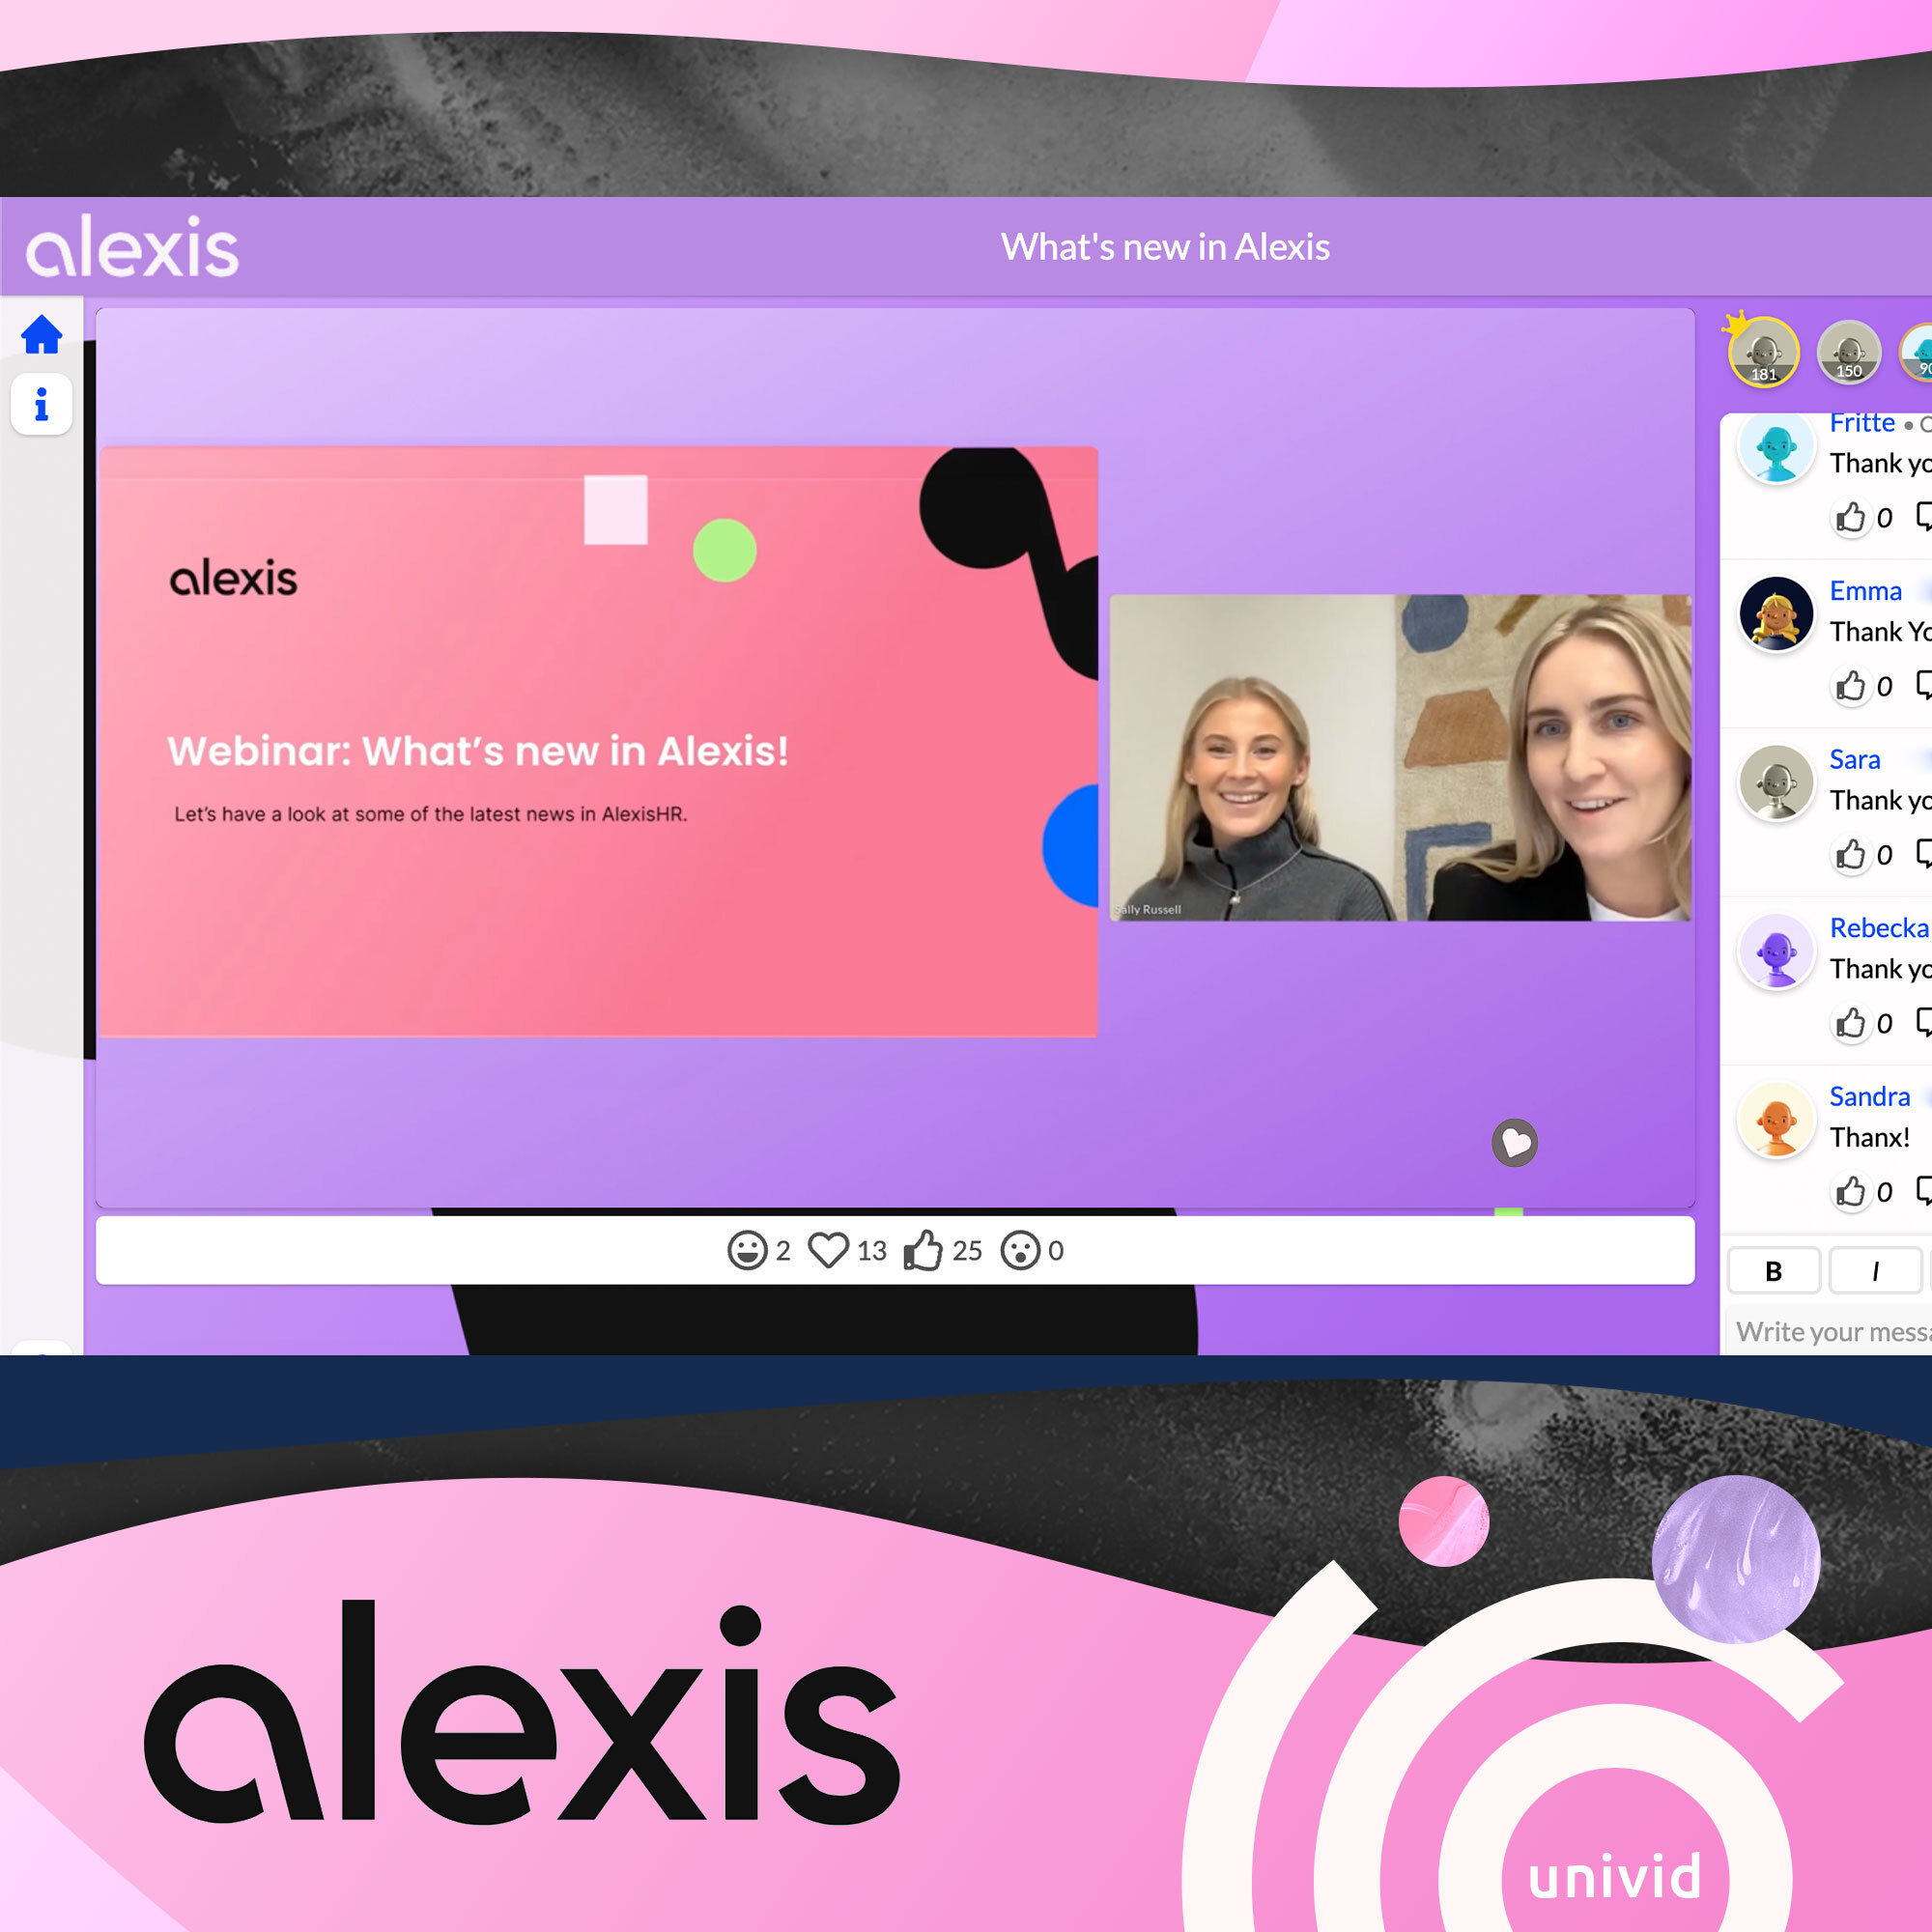 What's new in Alexis? Sally and Elina bring AlexisHR customers to 45 min of interactive product updates every other week. Going through Alexis new features, AI automation tools, and improvements. These webinars serve a great opportunity for the AlexisHR community and users to get familiar with the latest product news and trends in HR; and get their questions answered by the team - through chat and video.